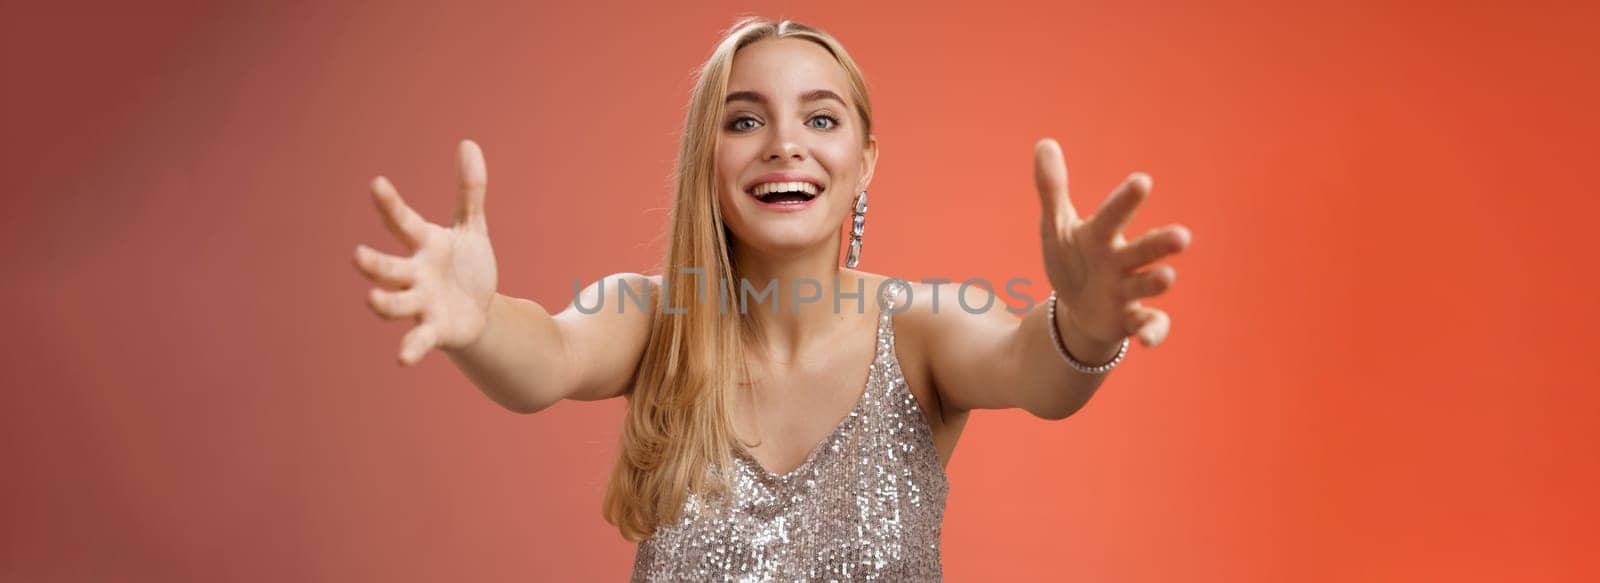 Hospitable charming nice young blond woman wanna hug come closer camera extend arms welcoming embracing cuddling being clingy smiling delighted standing amused red background. Copy space